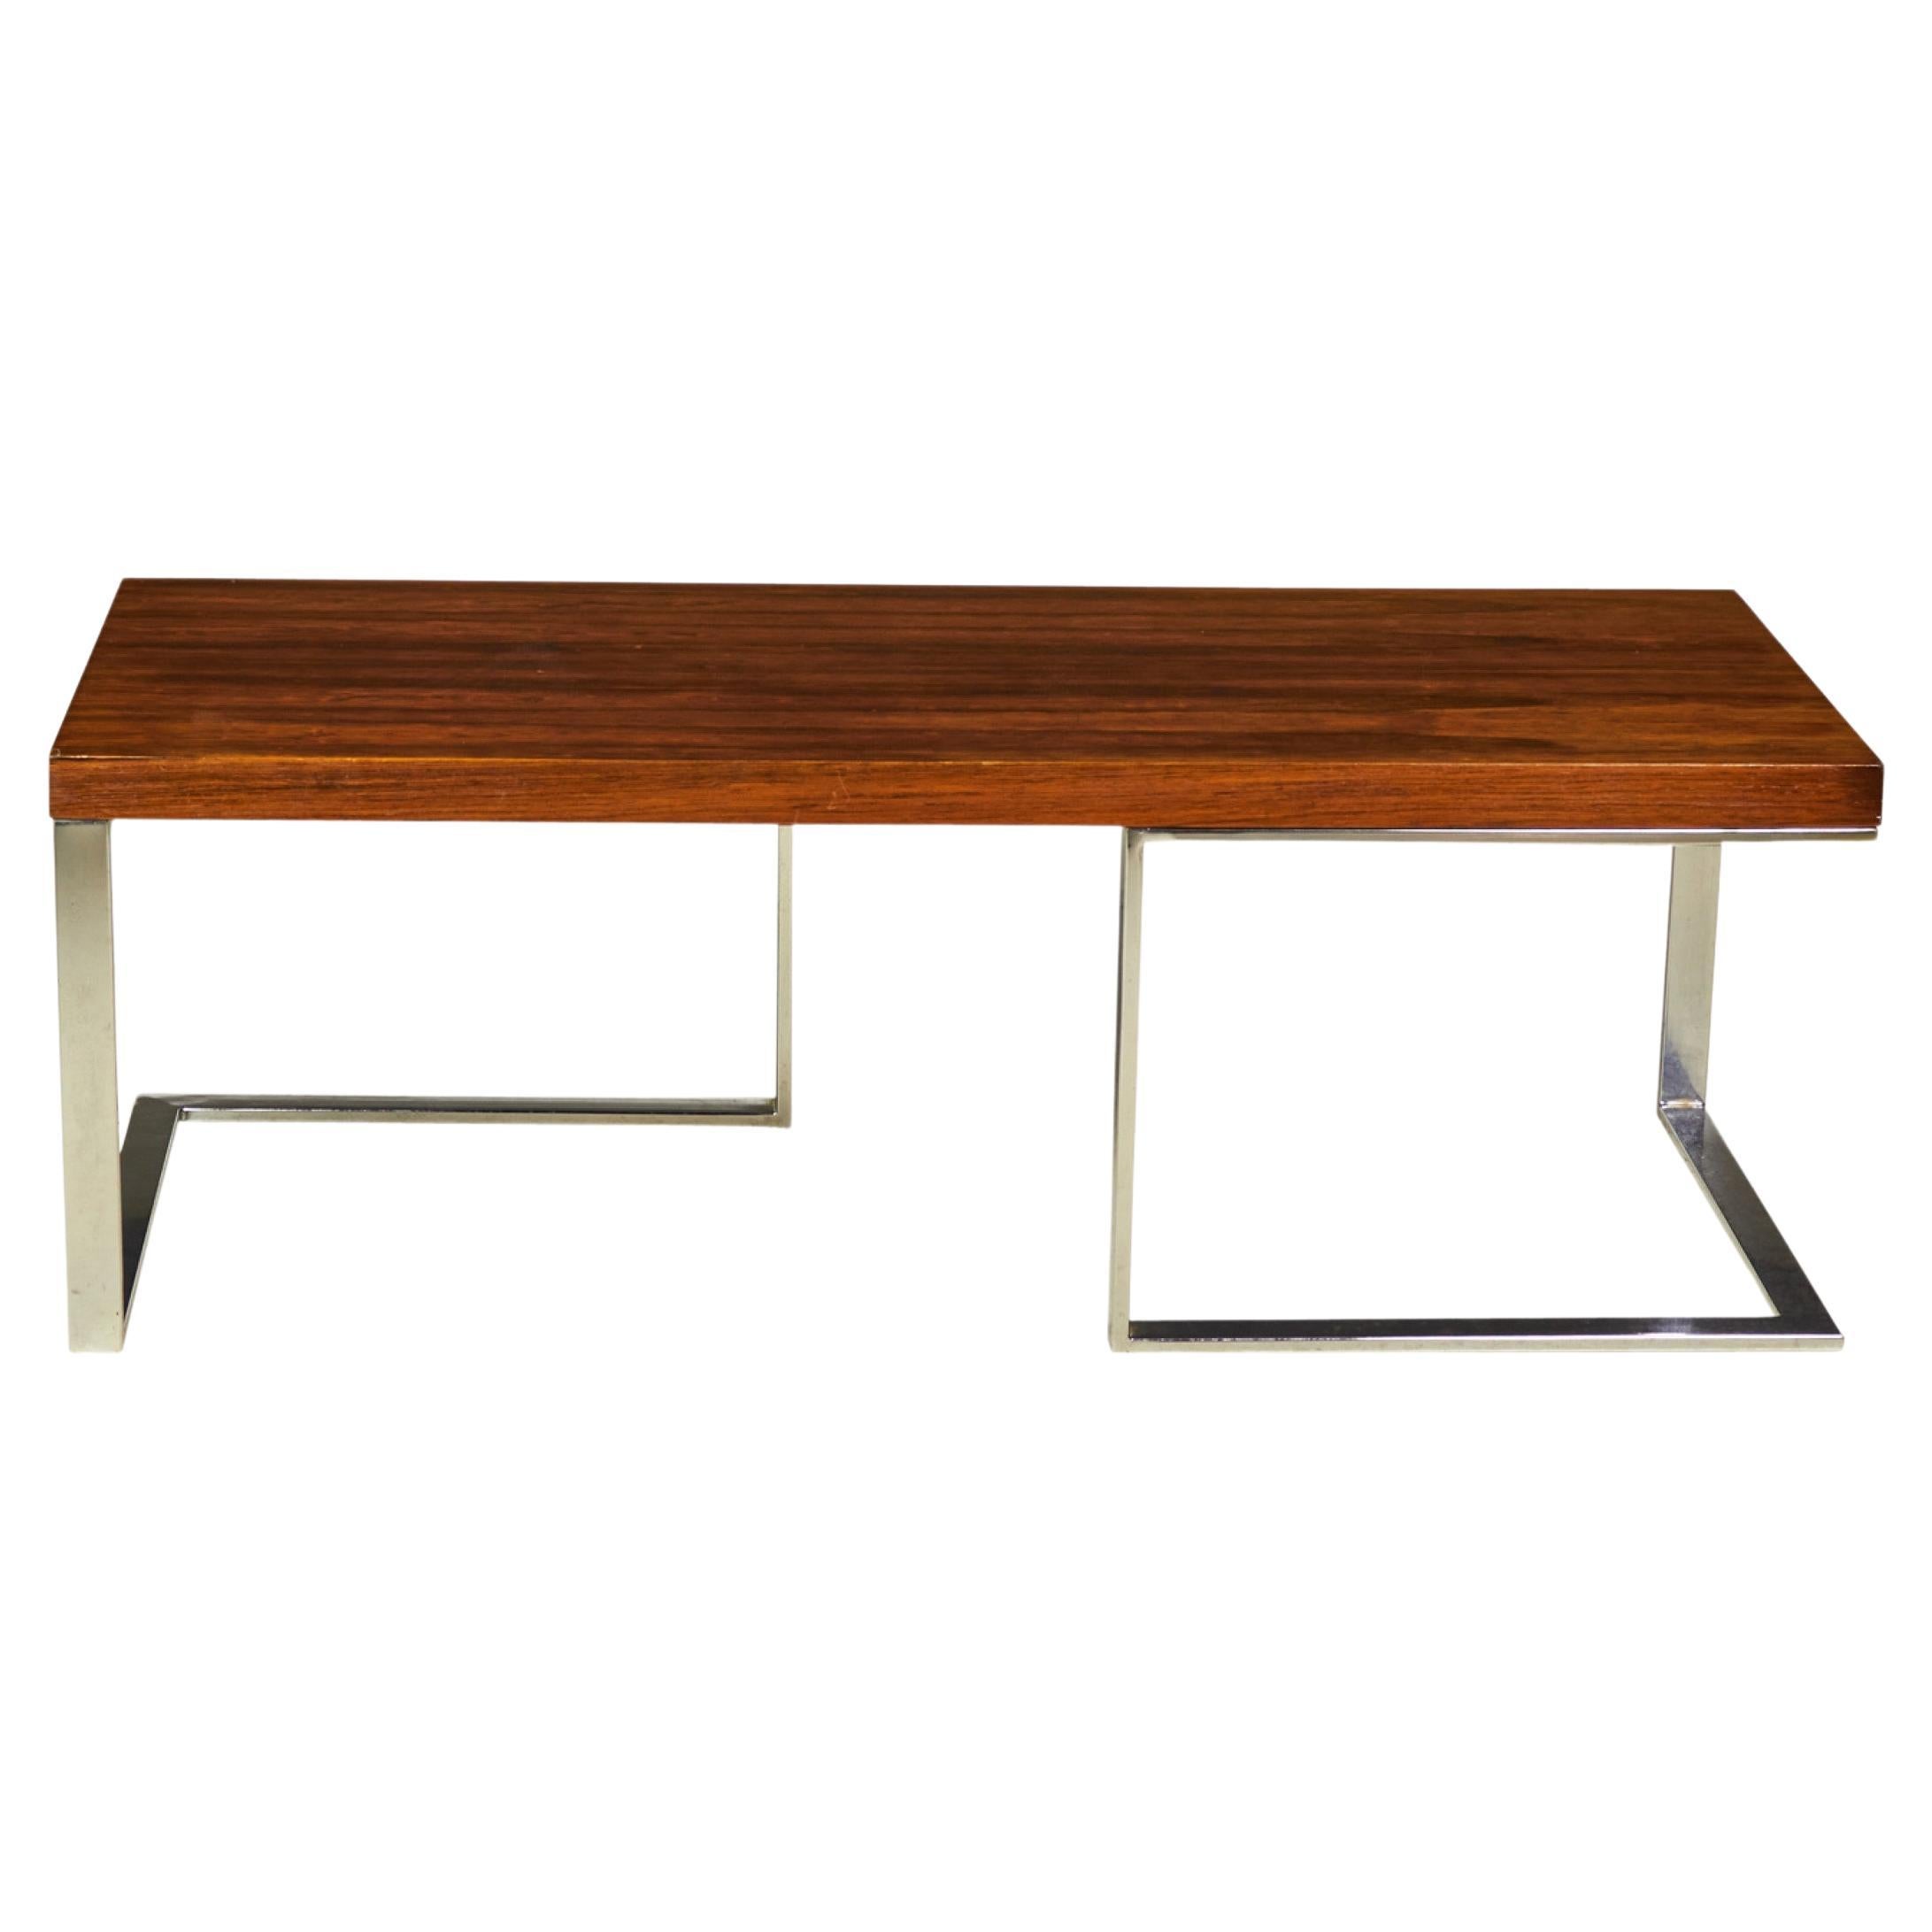 Milo Baughman for Thayer Coggin Rosewood 'Minimalist' Cocktail / Coffee Table